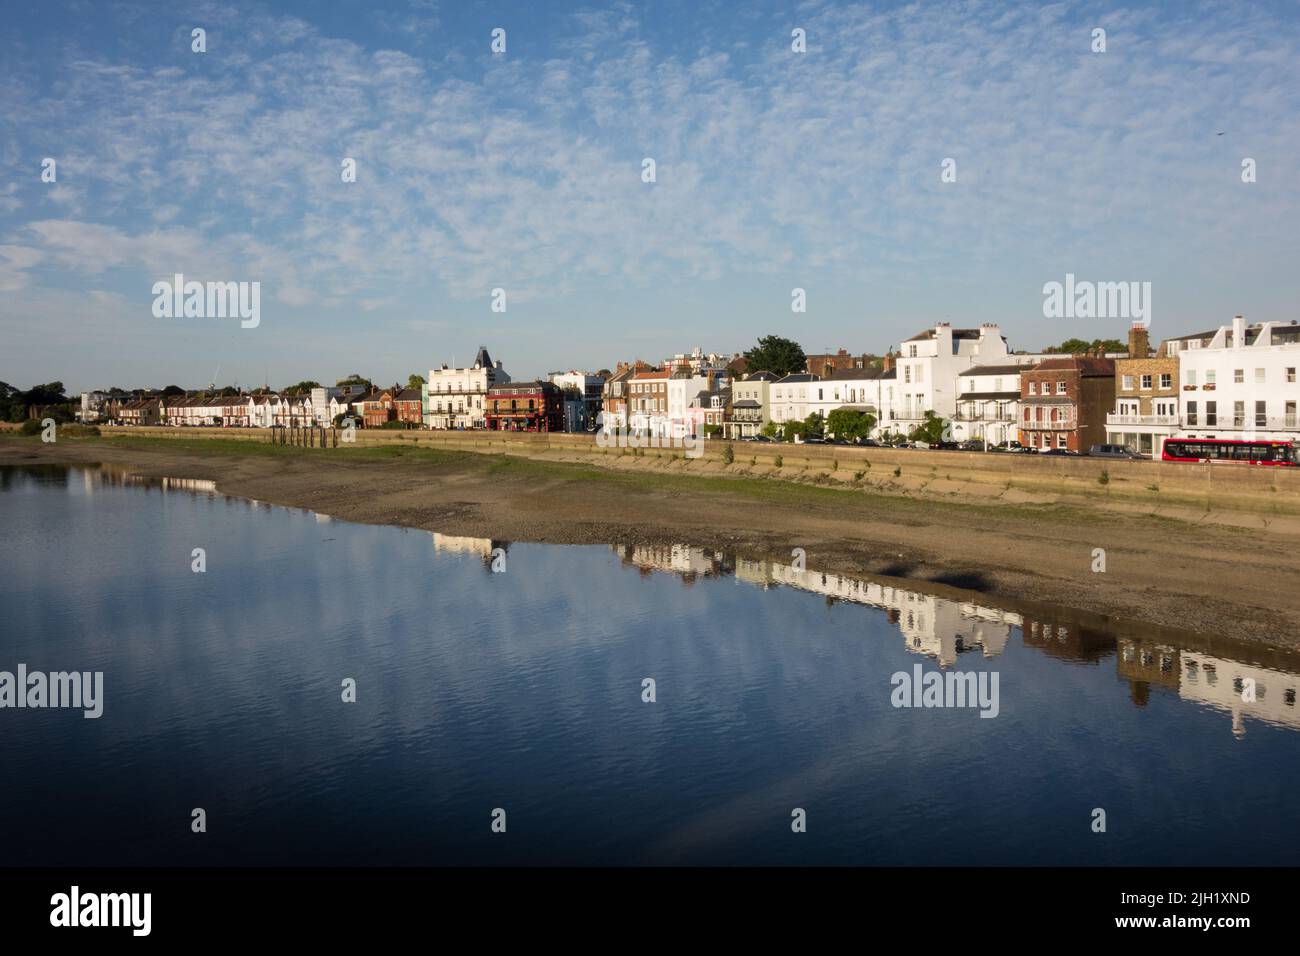 A dappled sky and reflections on the River Thames on the Terrace at Barnes, southwest London, England, UK Stock Photo